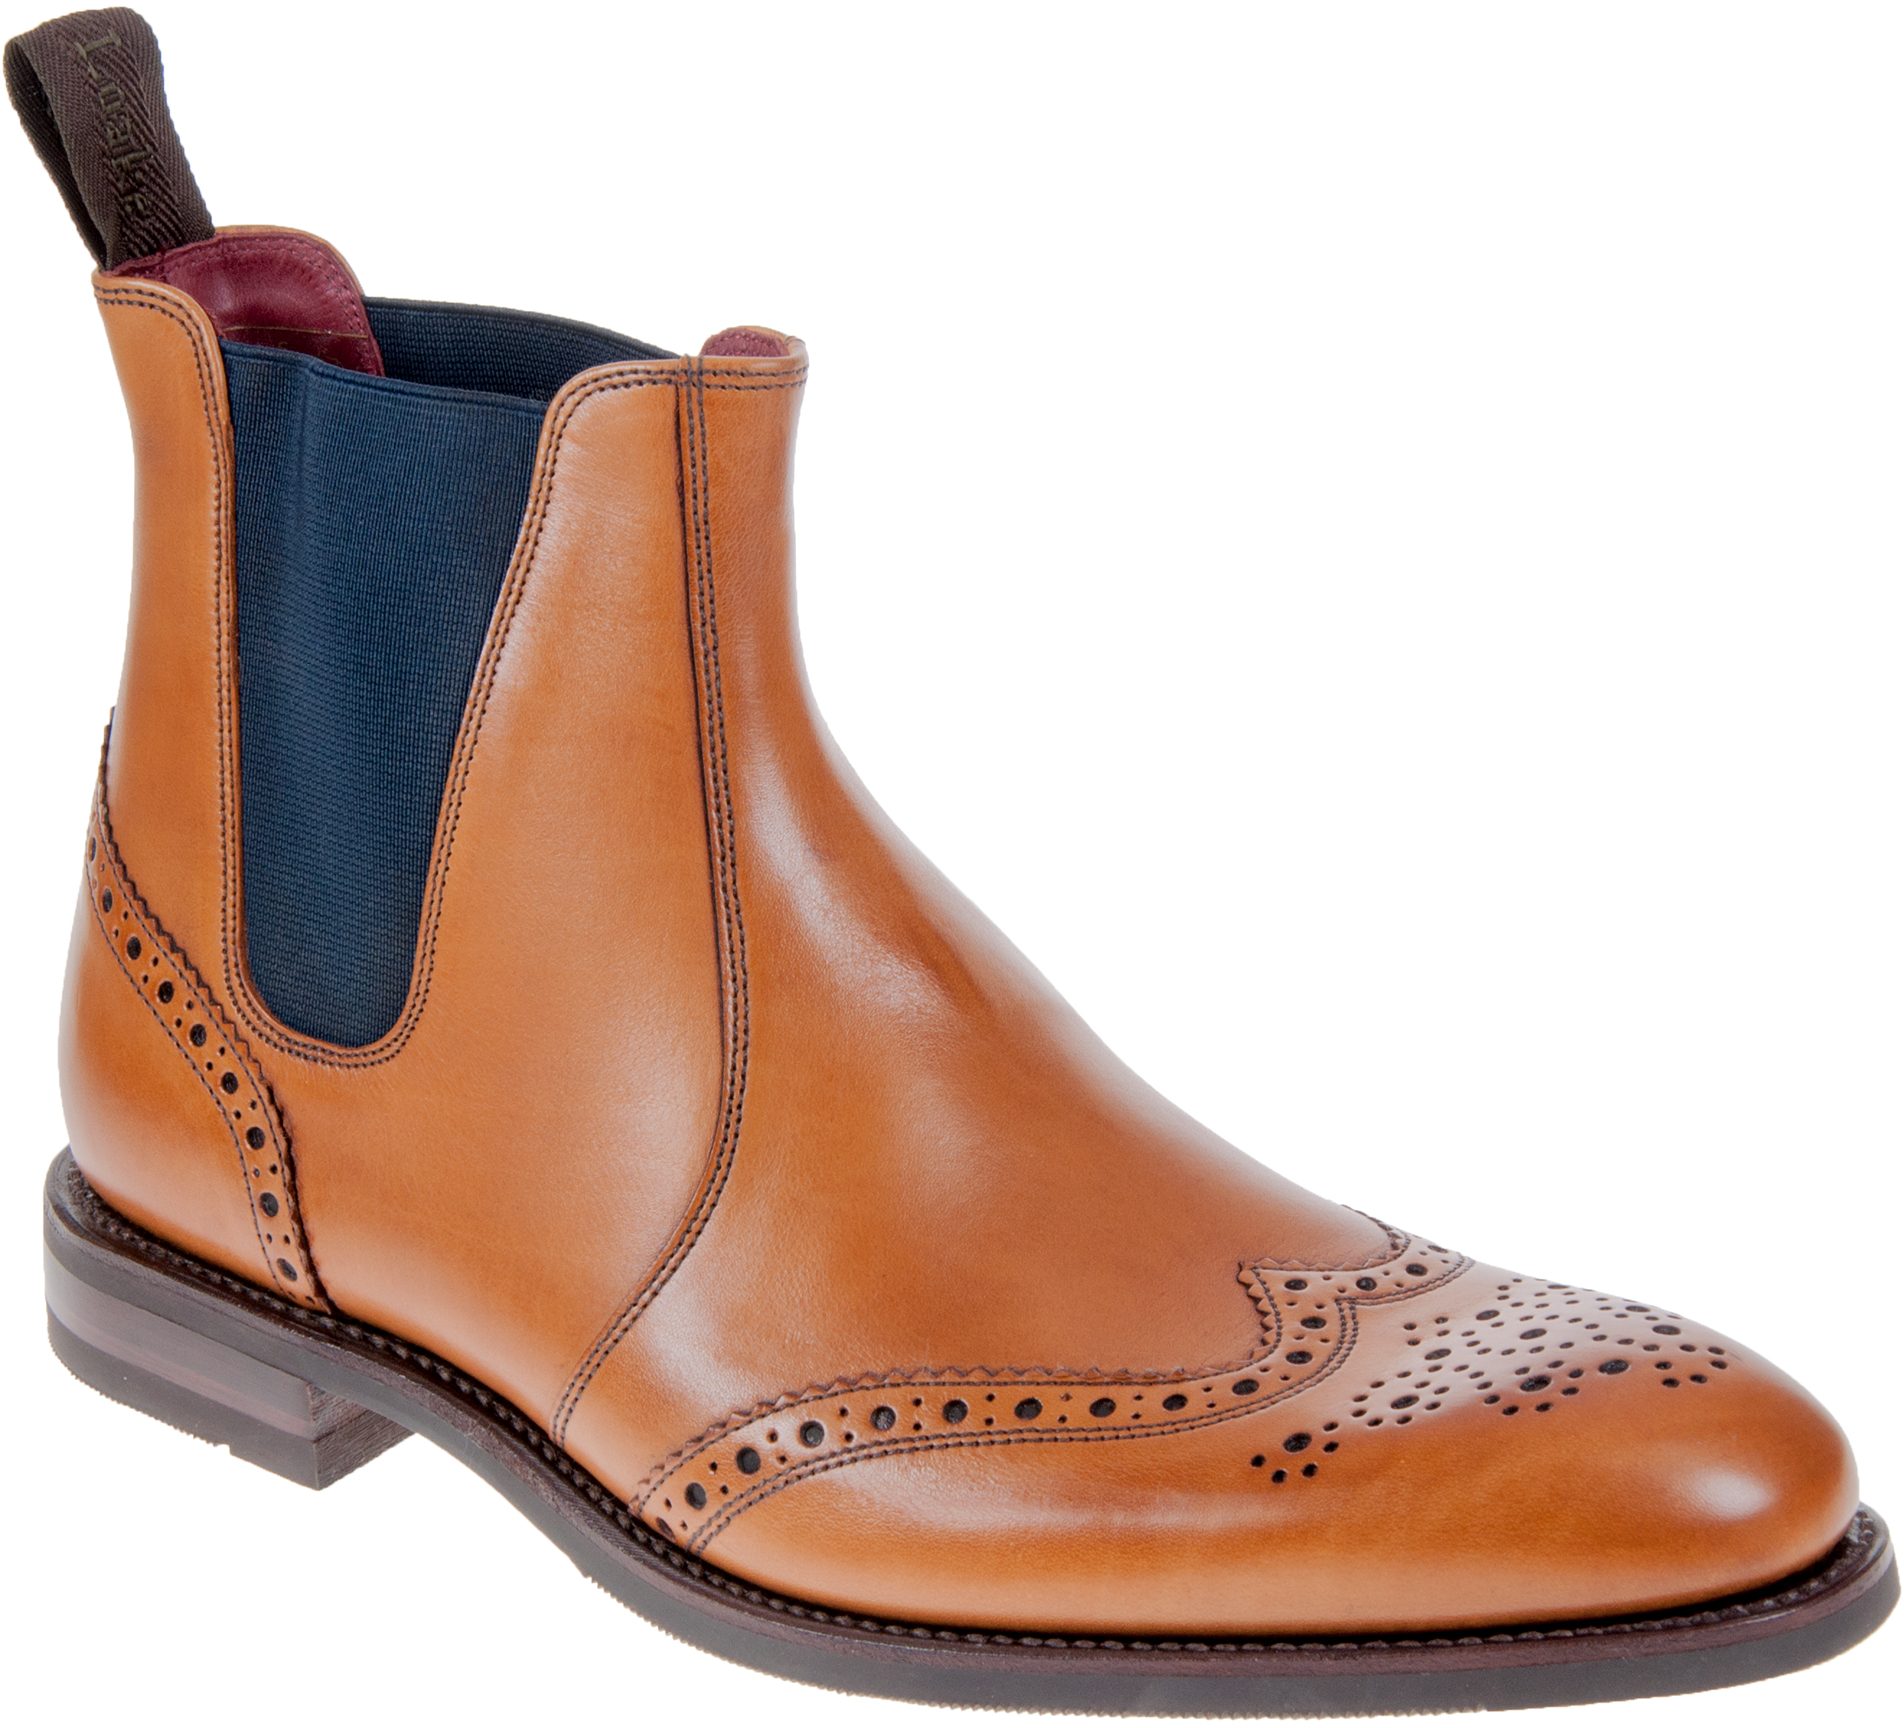 Loake Hoskins Tan - Formal Boots - Humphries Shoes